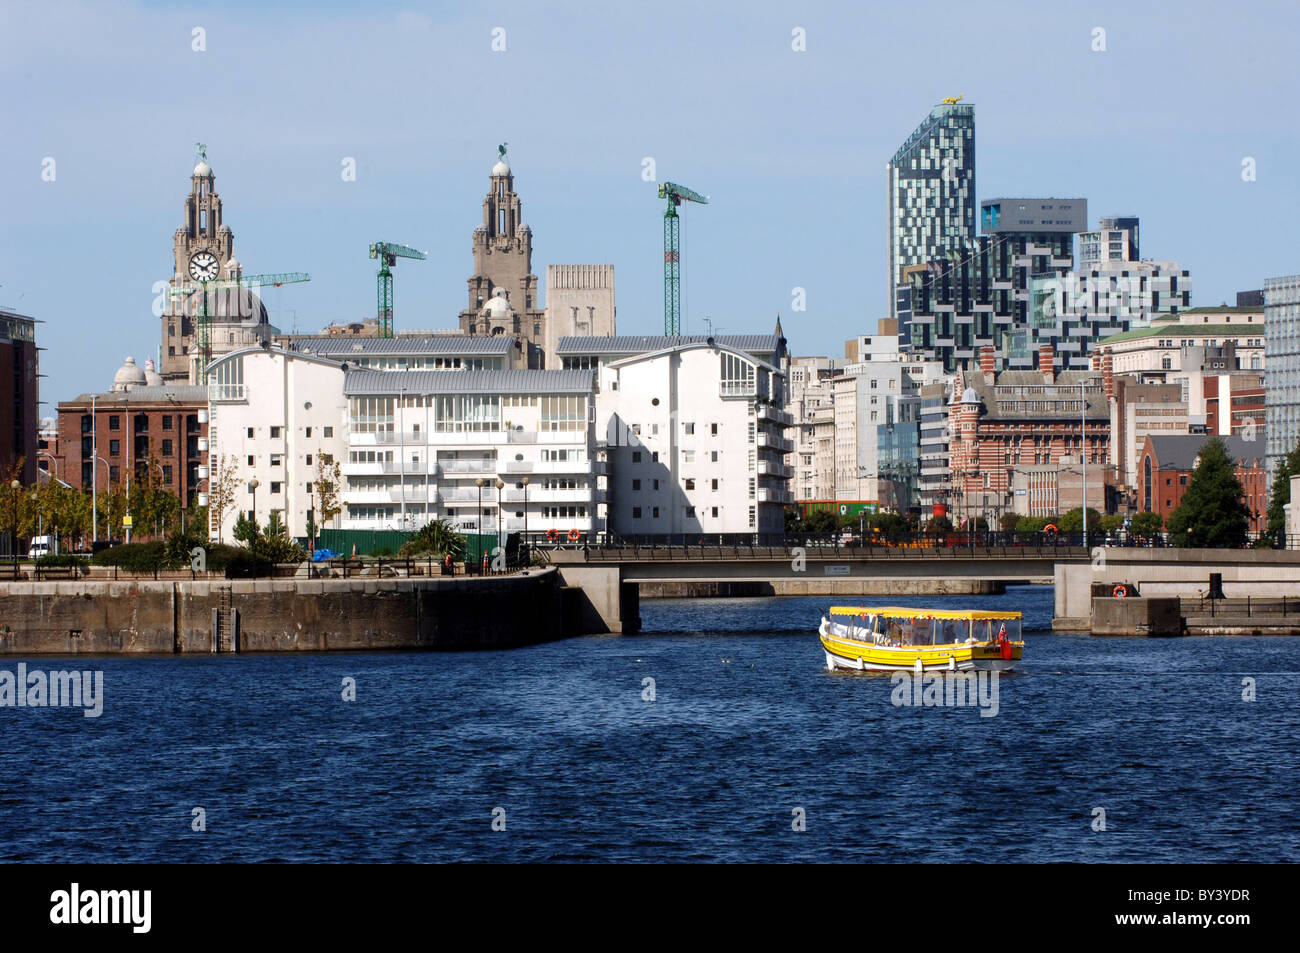 View looking towards Liverpool city centre showing Liver Building, apartments, offices and the docklands. Stock Photo